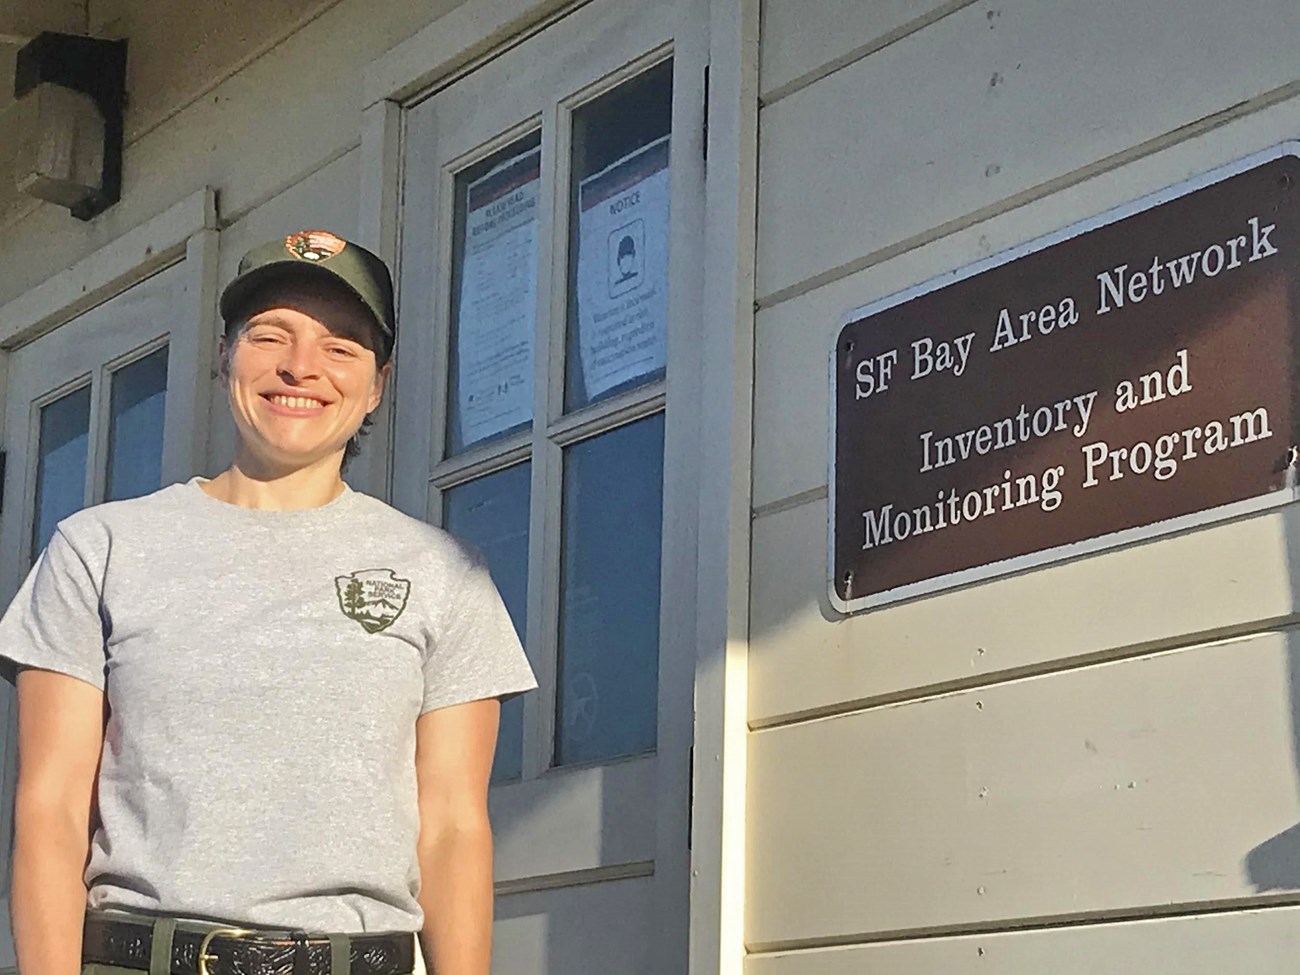 Botanist Lisa Schomaker is pictured smiling next to a sign for the San Francisco Bay Area Network Inventory & Monitoring Program.